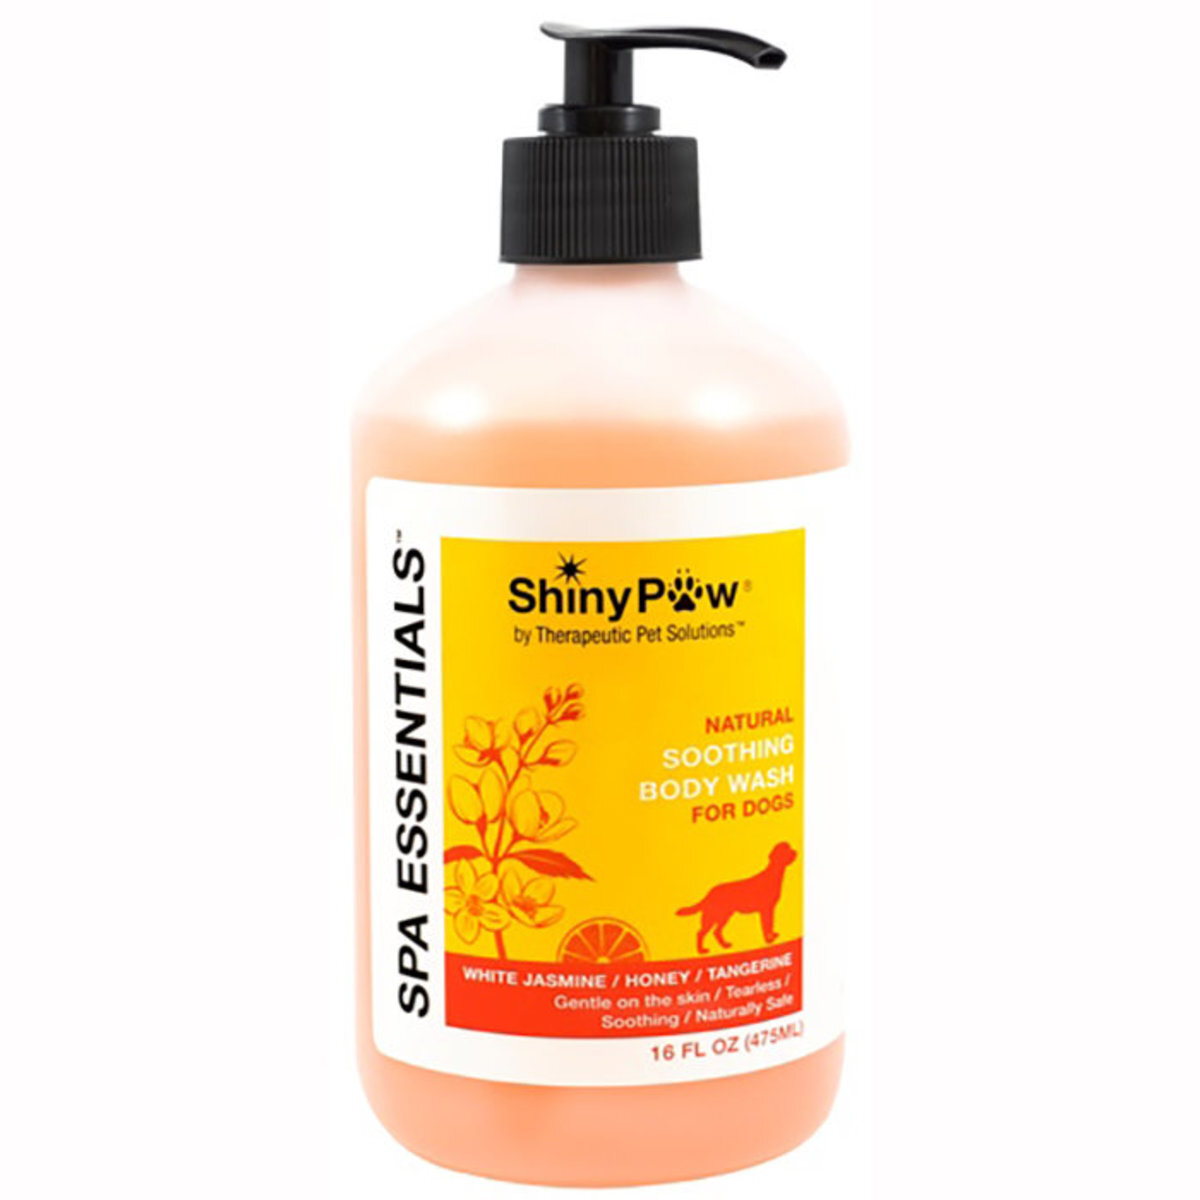 Natural Soothing Body Wash For Dogs 475ml